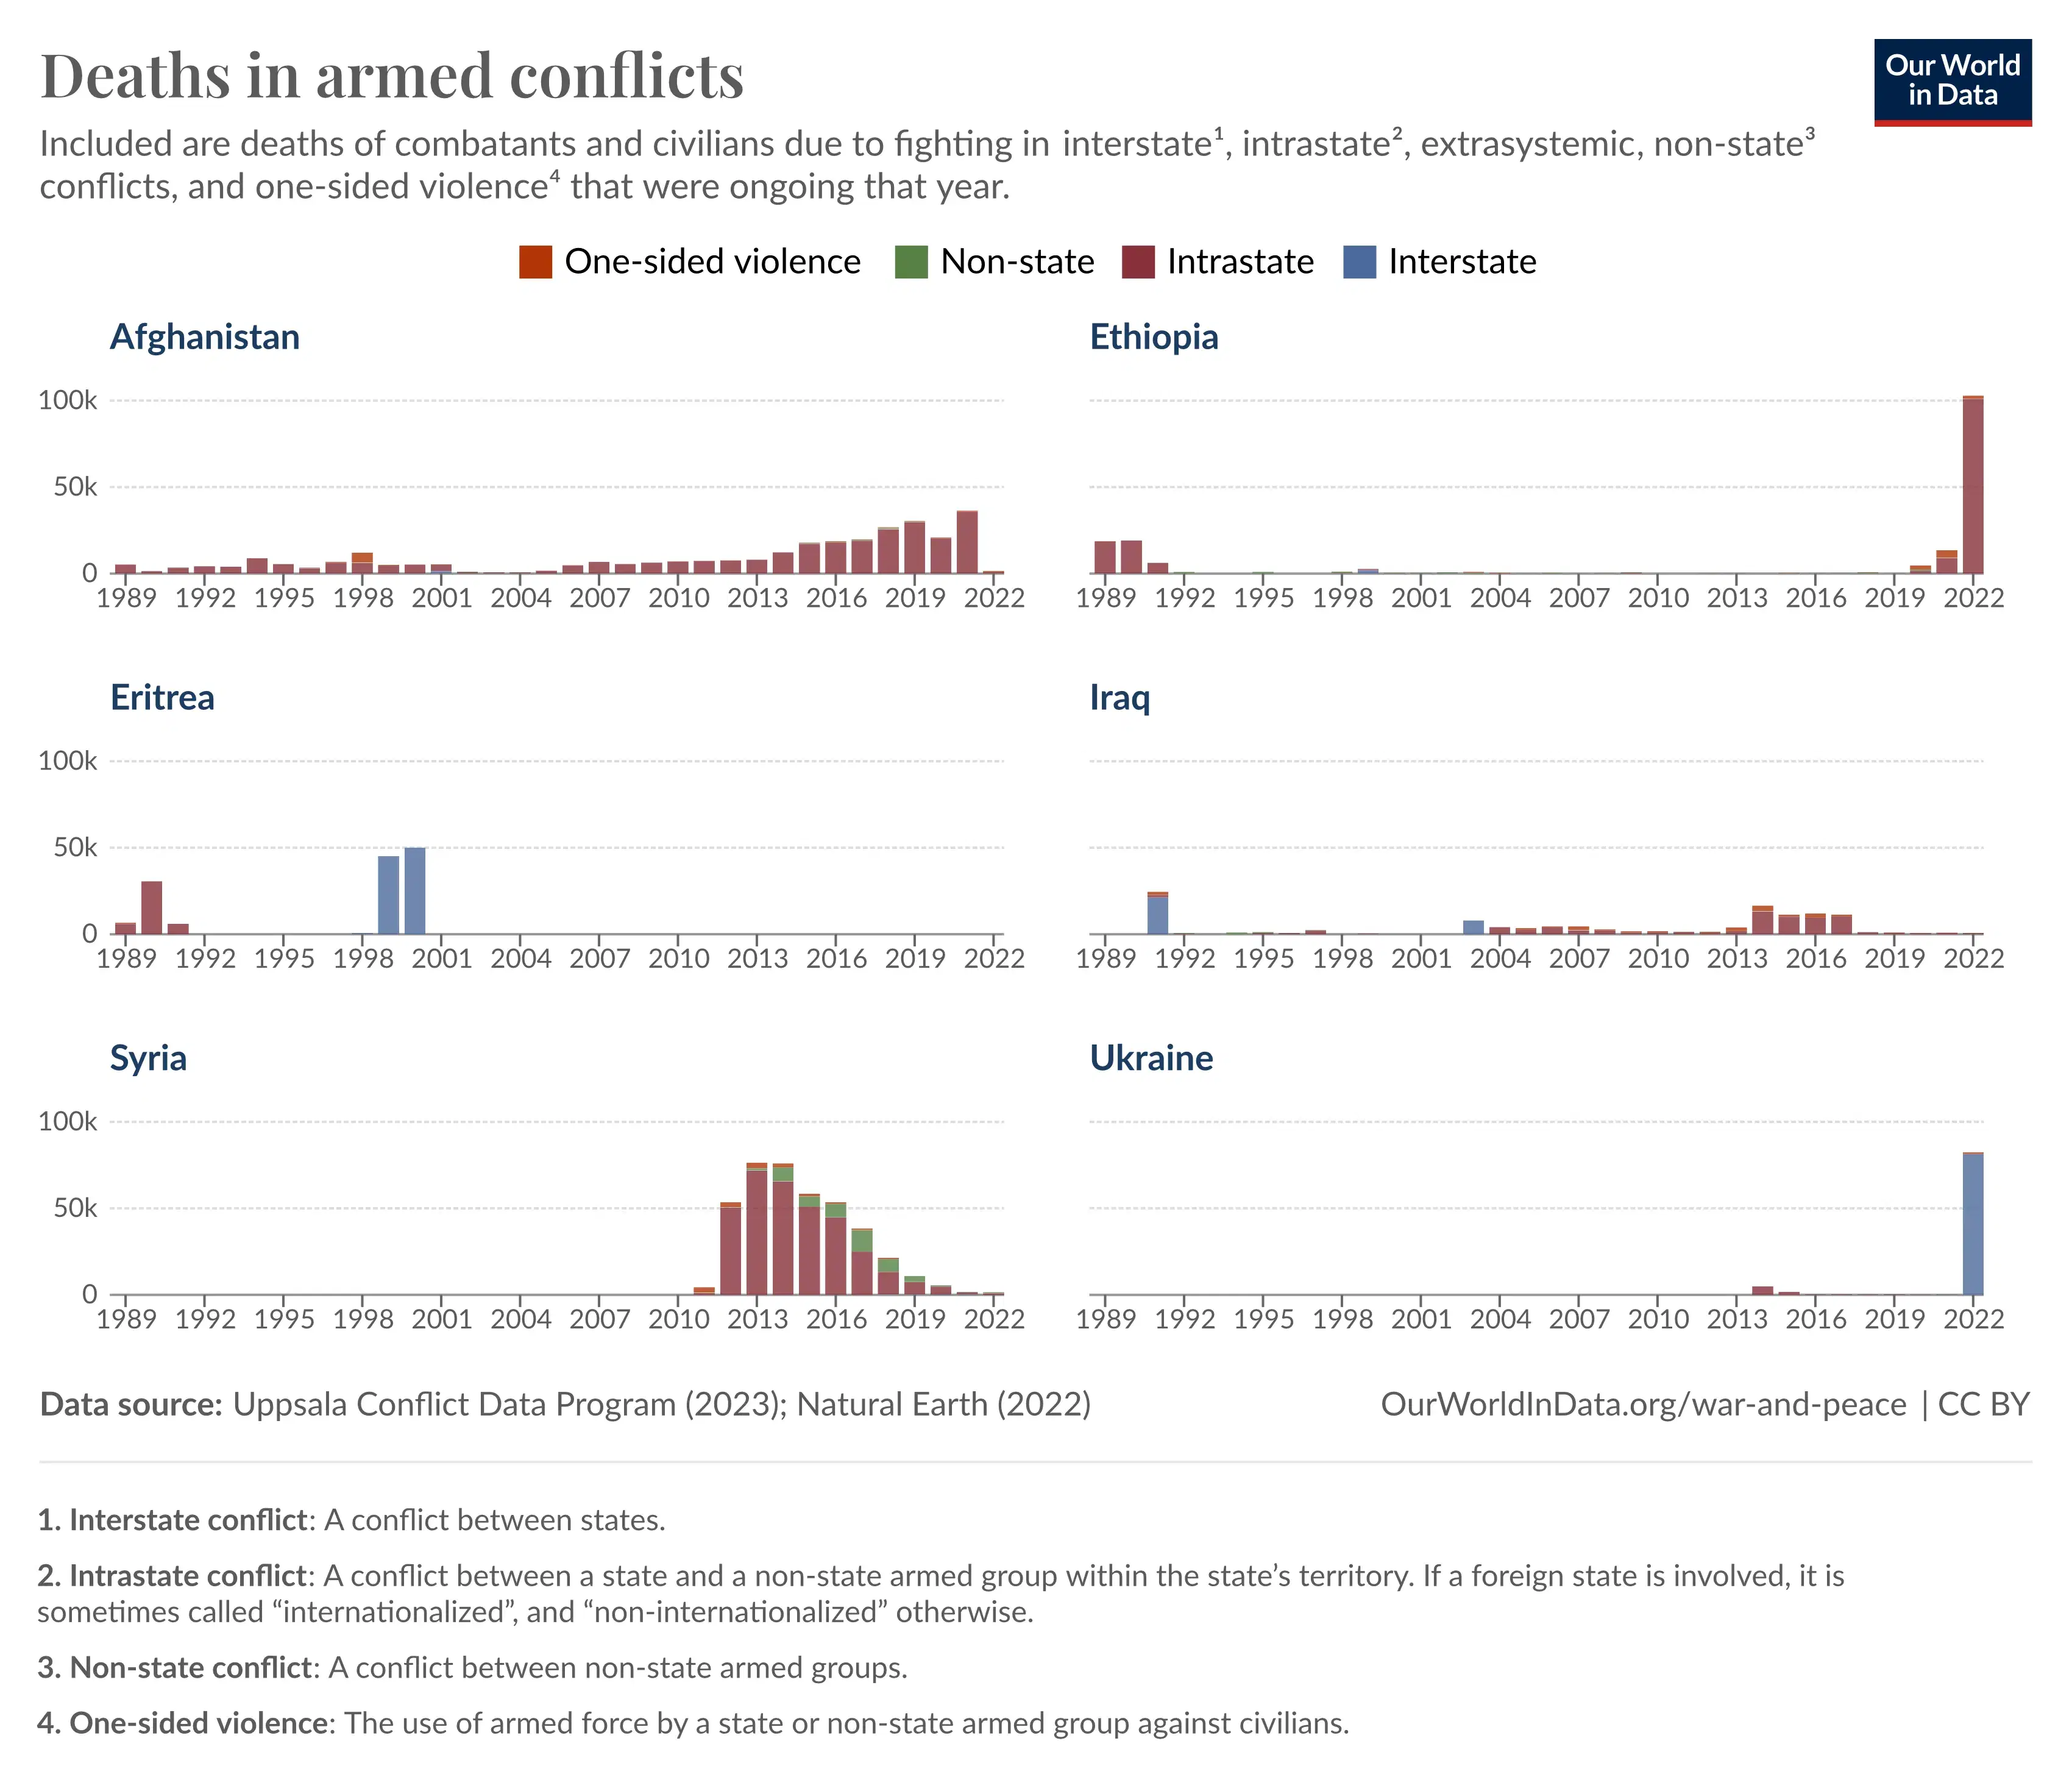 Deaths in Armed Conflicts, Selected Countries (1989–2022)